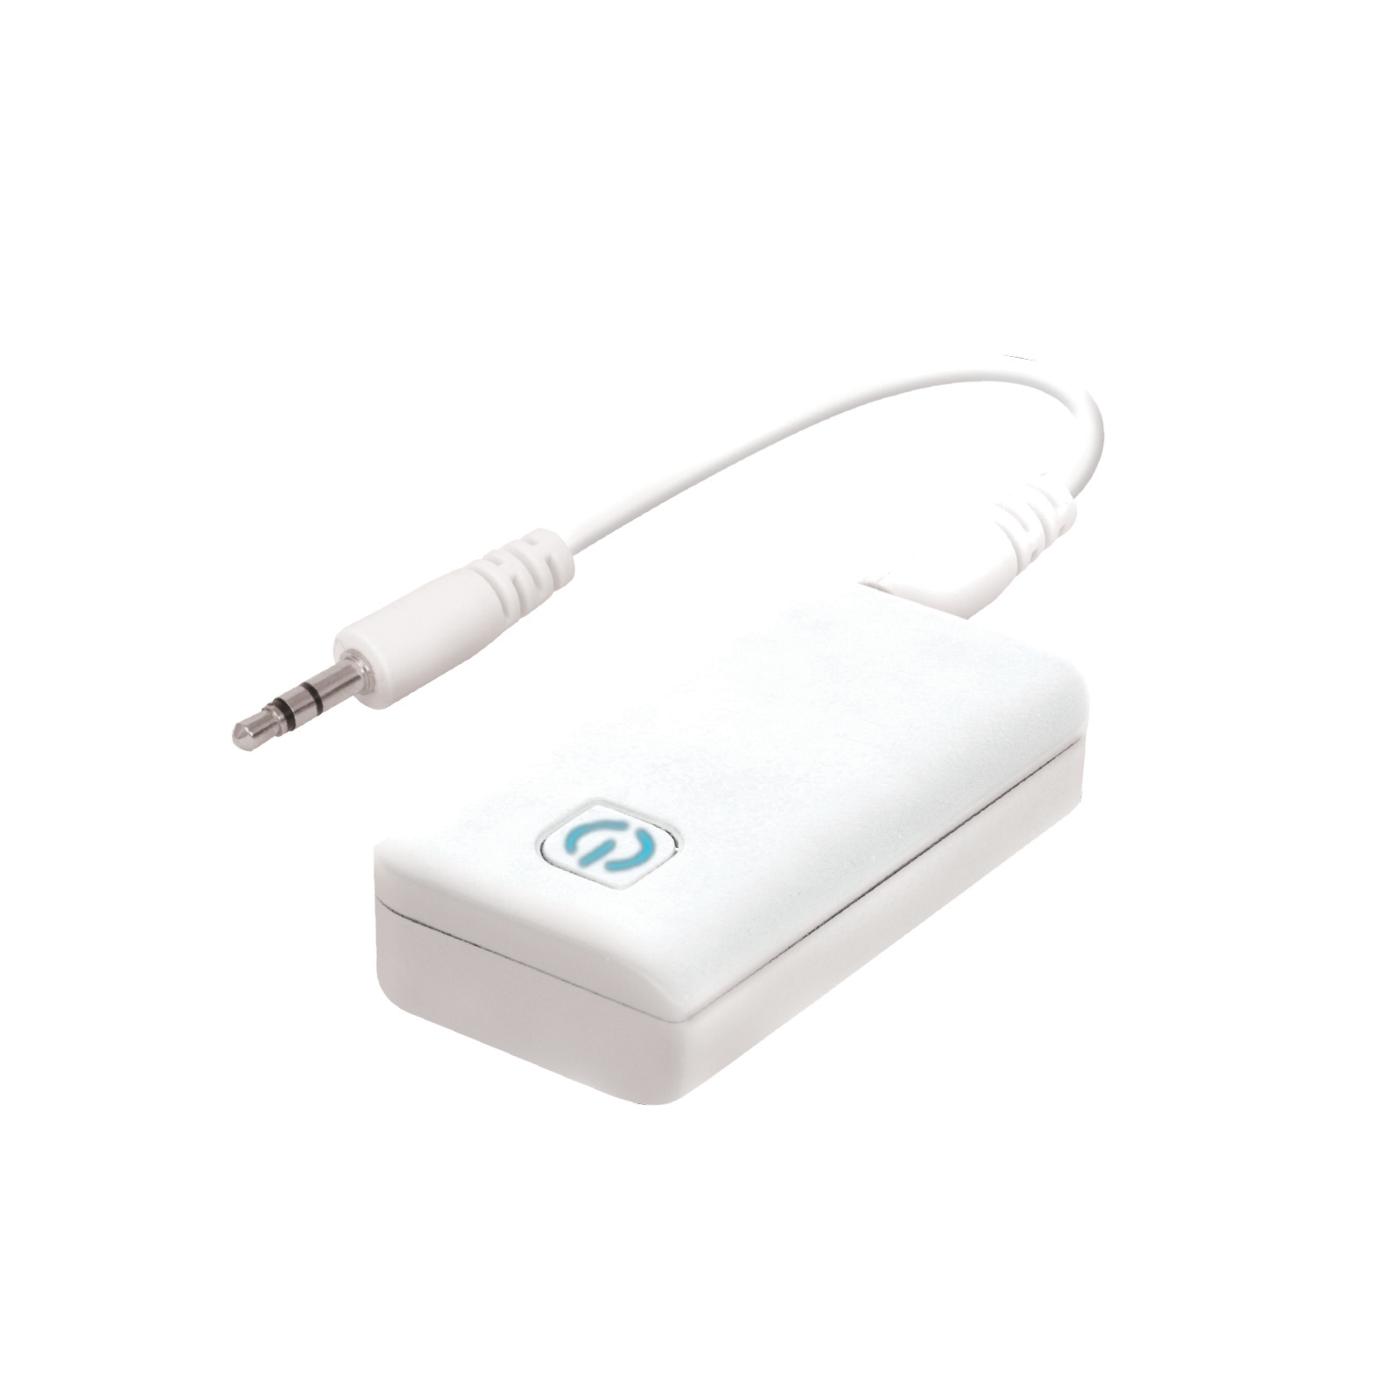 Helix Fly Wireless Bluetooth Audio Adapter - Shop Connection